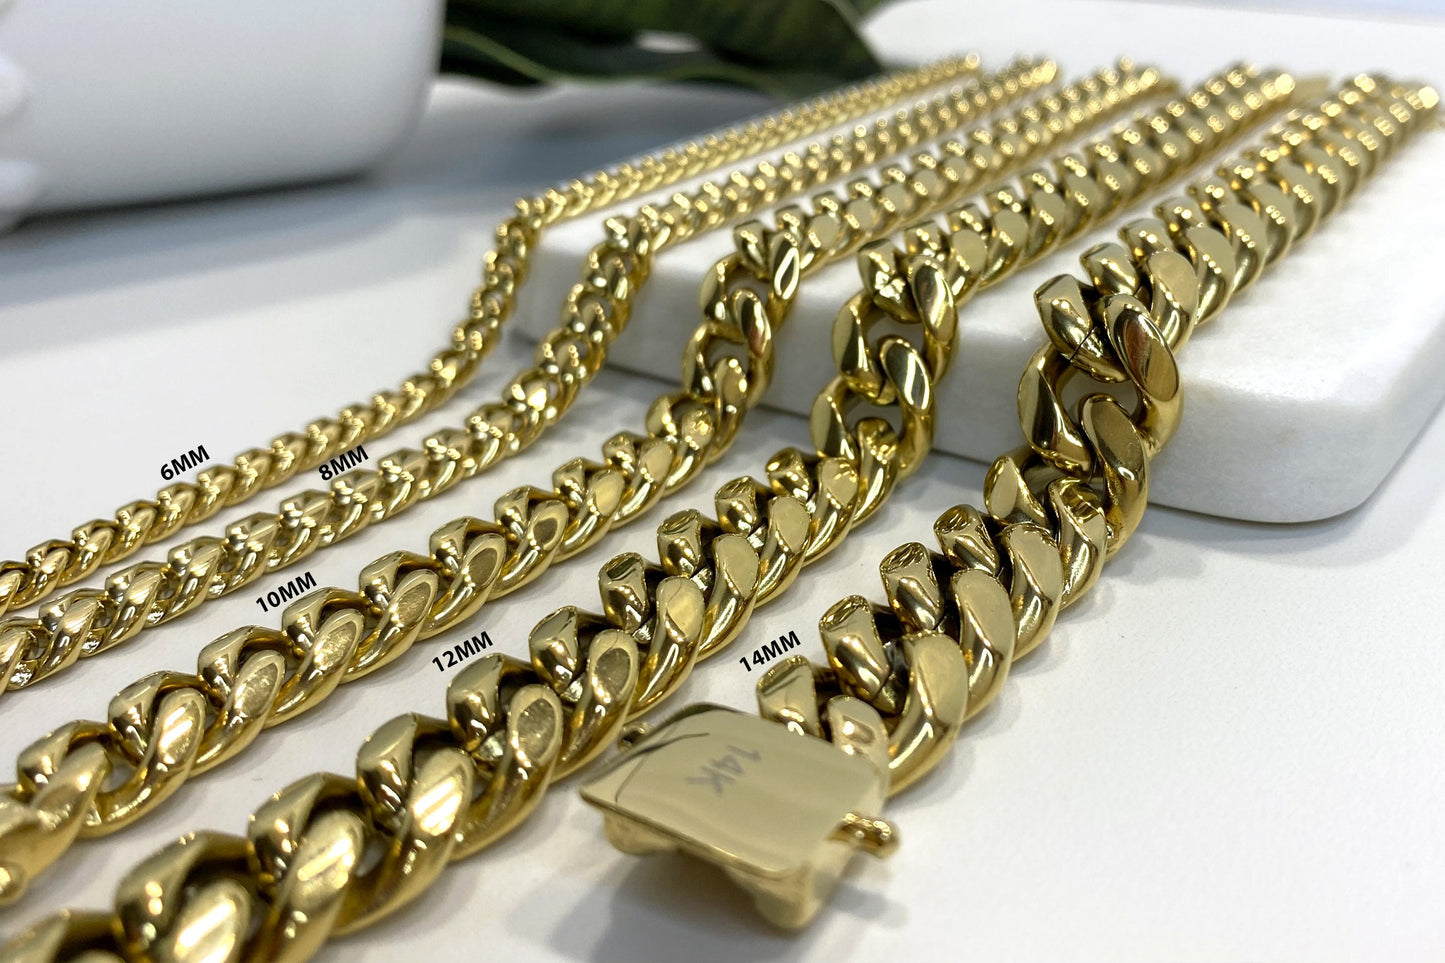 12mm Miami Cuban Chain in 14k Gold Filled, Double Safety Lock Box, Chunky Curb Link Chain, Unisex Necklace, Wholesale Jewelry Supplies